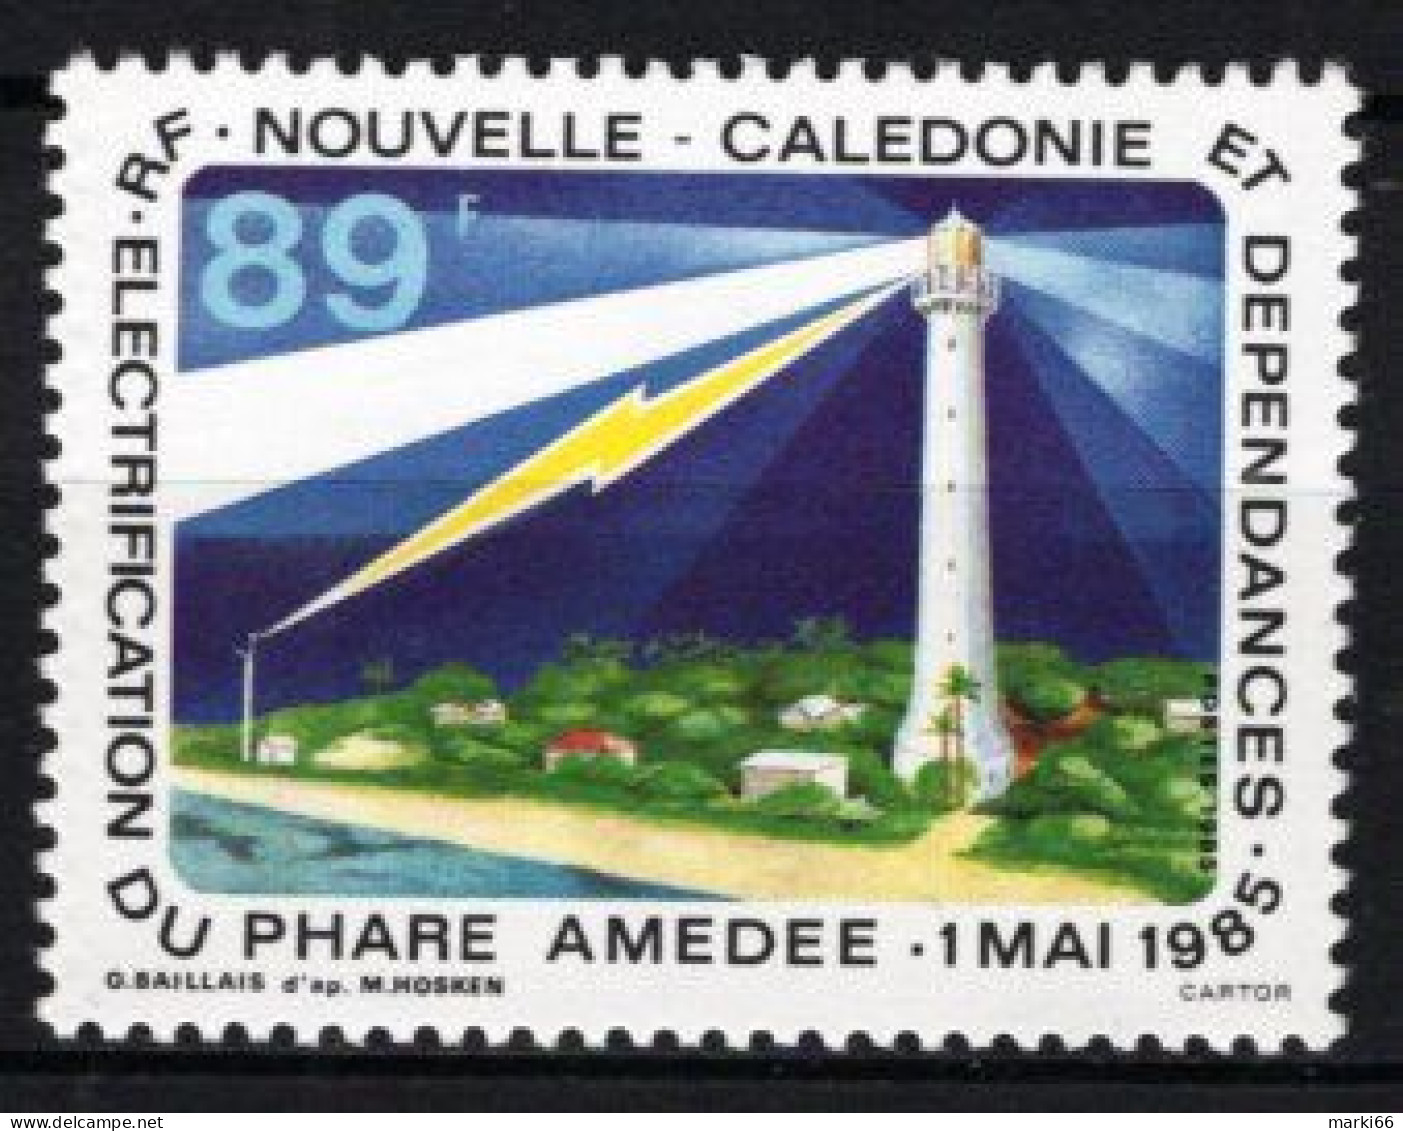 New Caledonia - 1985 - Electrification Amedee Lighthouse In 1985 - Mint Stamp - Ungebraucht